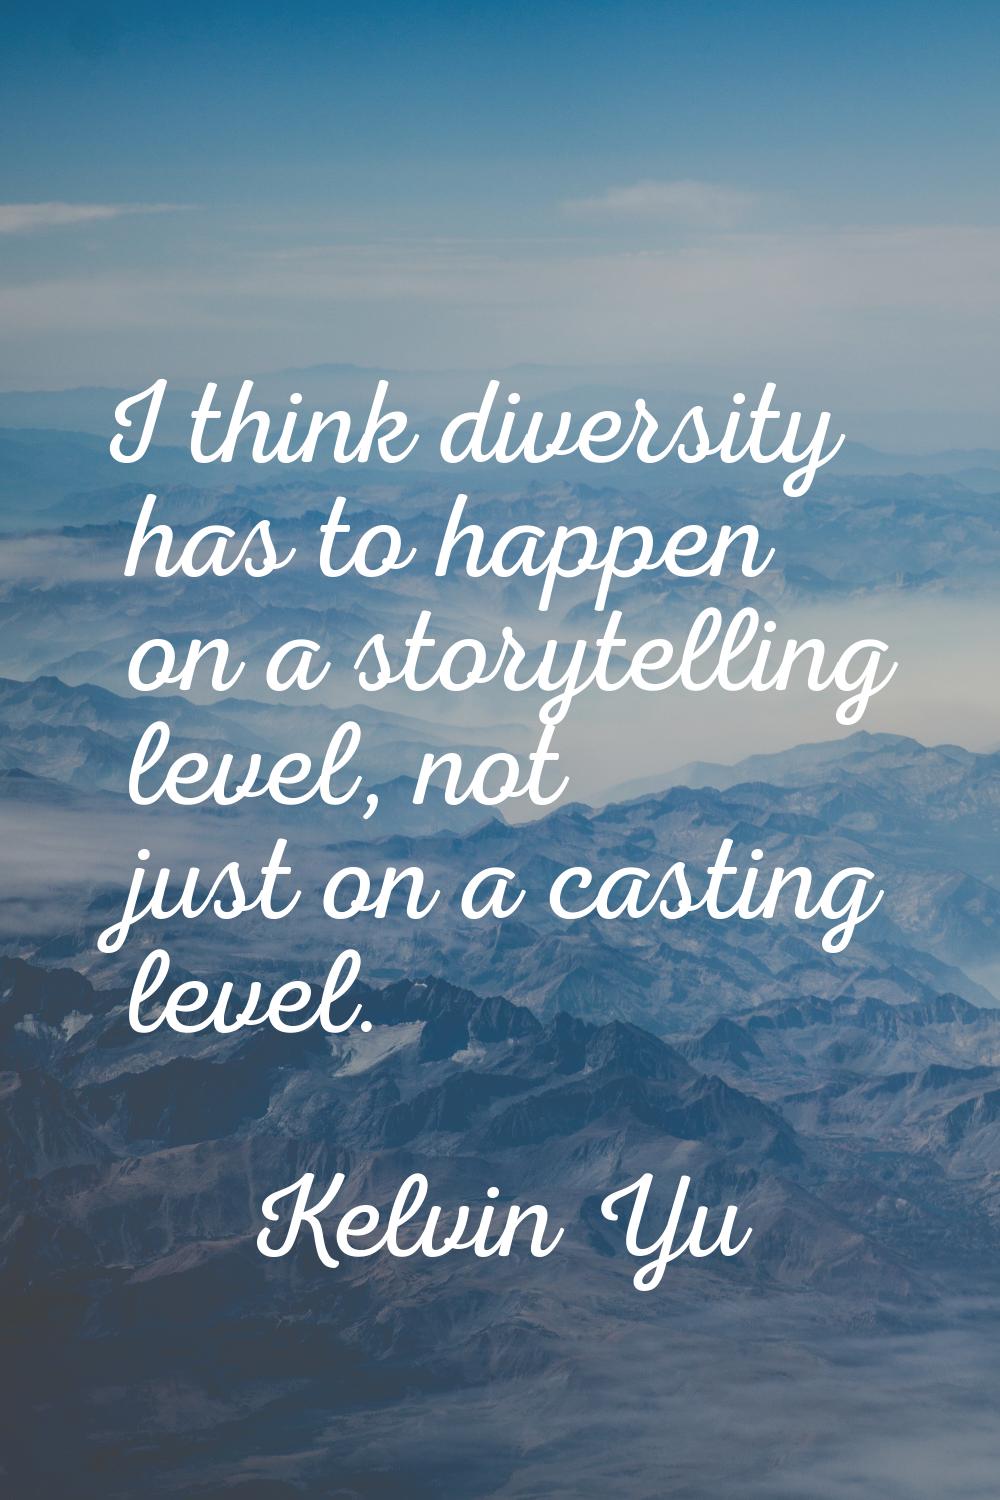 I think diversity has to happen on a storytelling level, not just on a casting level.